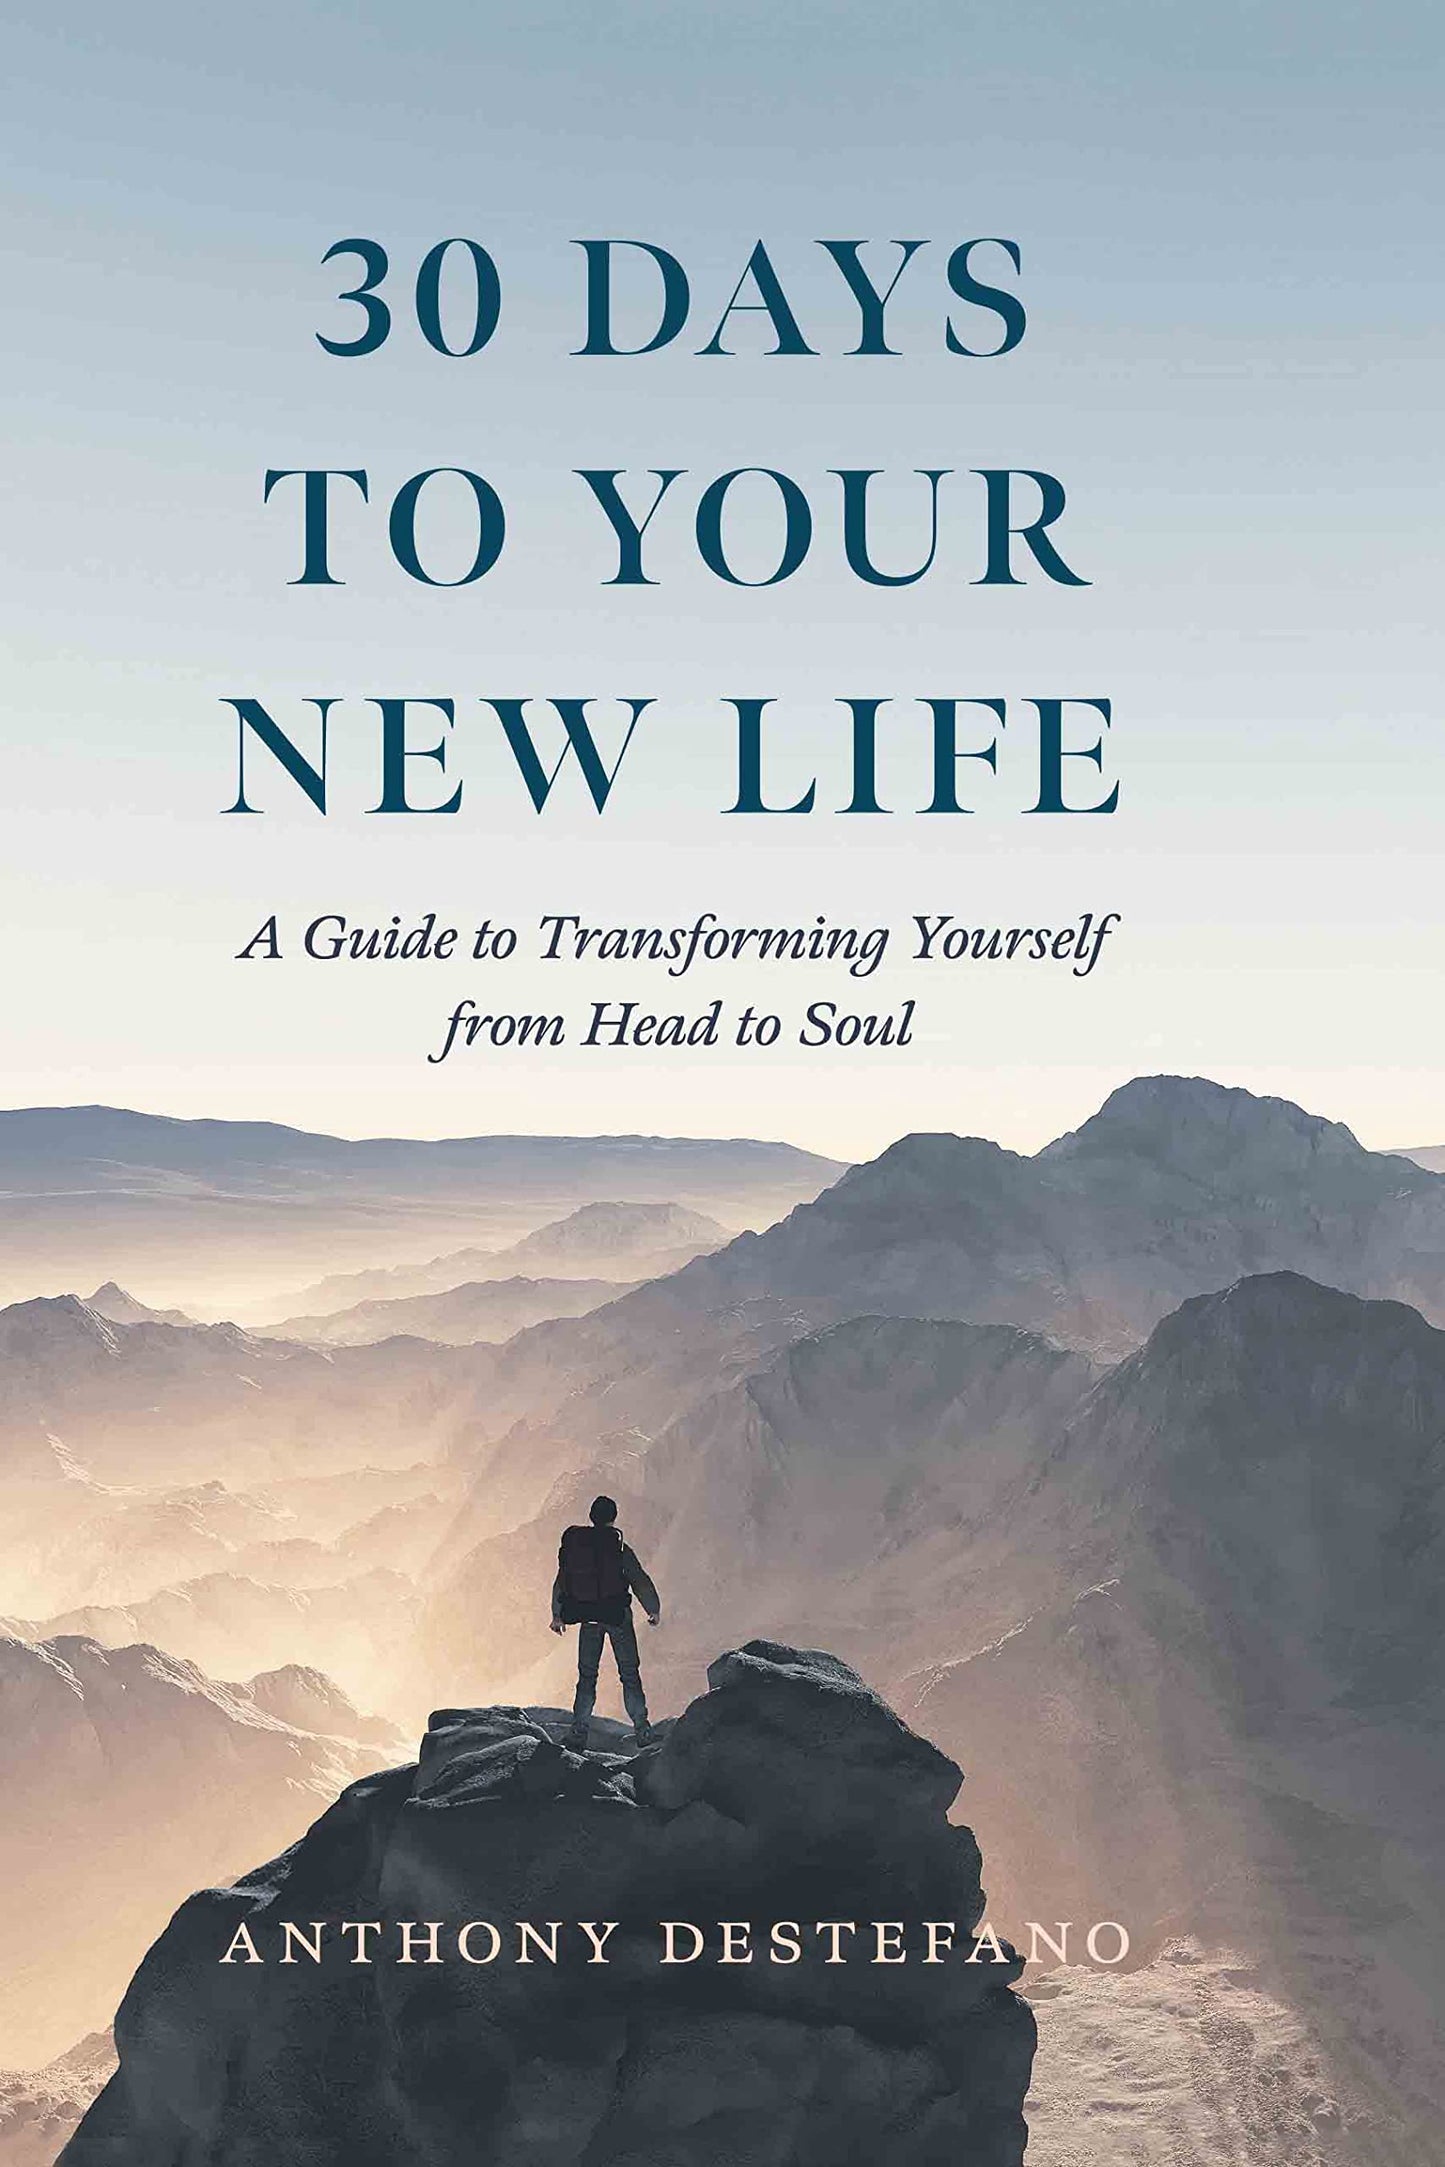 30 Days to Your New Life  A Guide to Transforming Yourself from Head to Soul